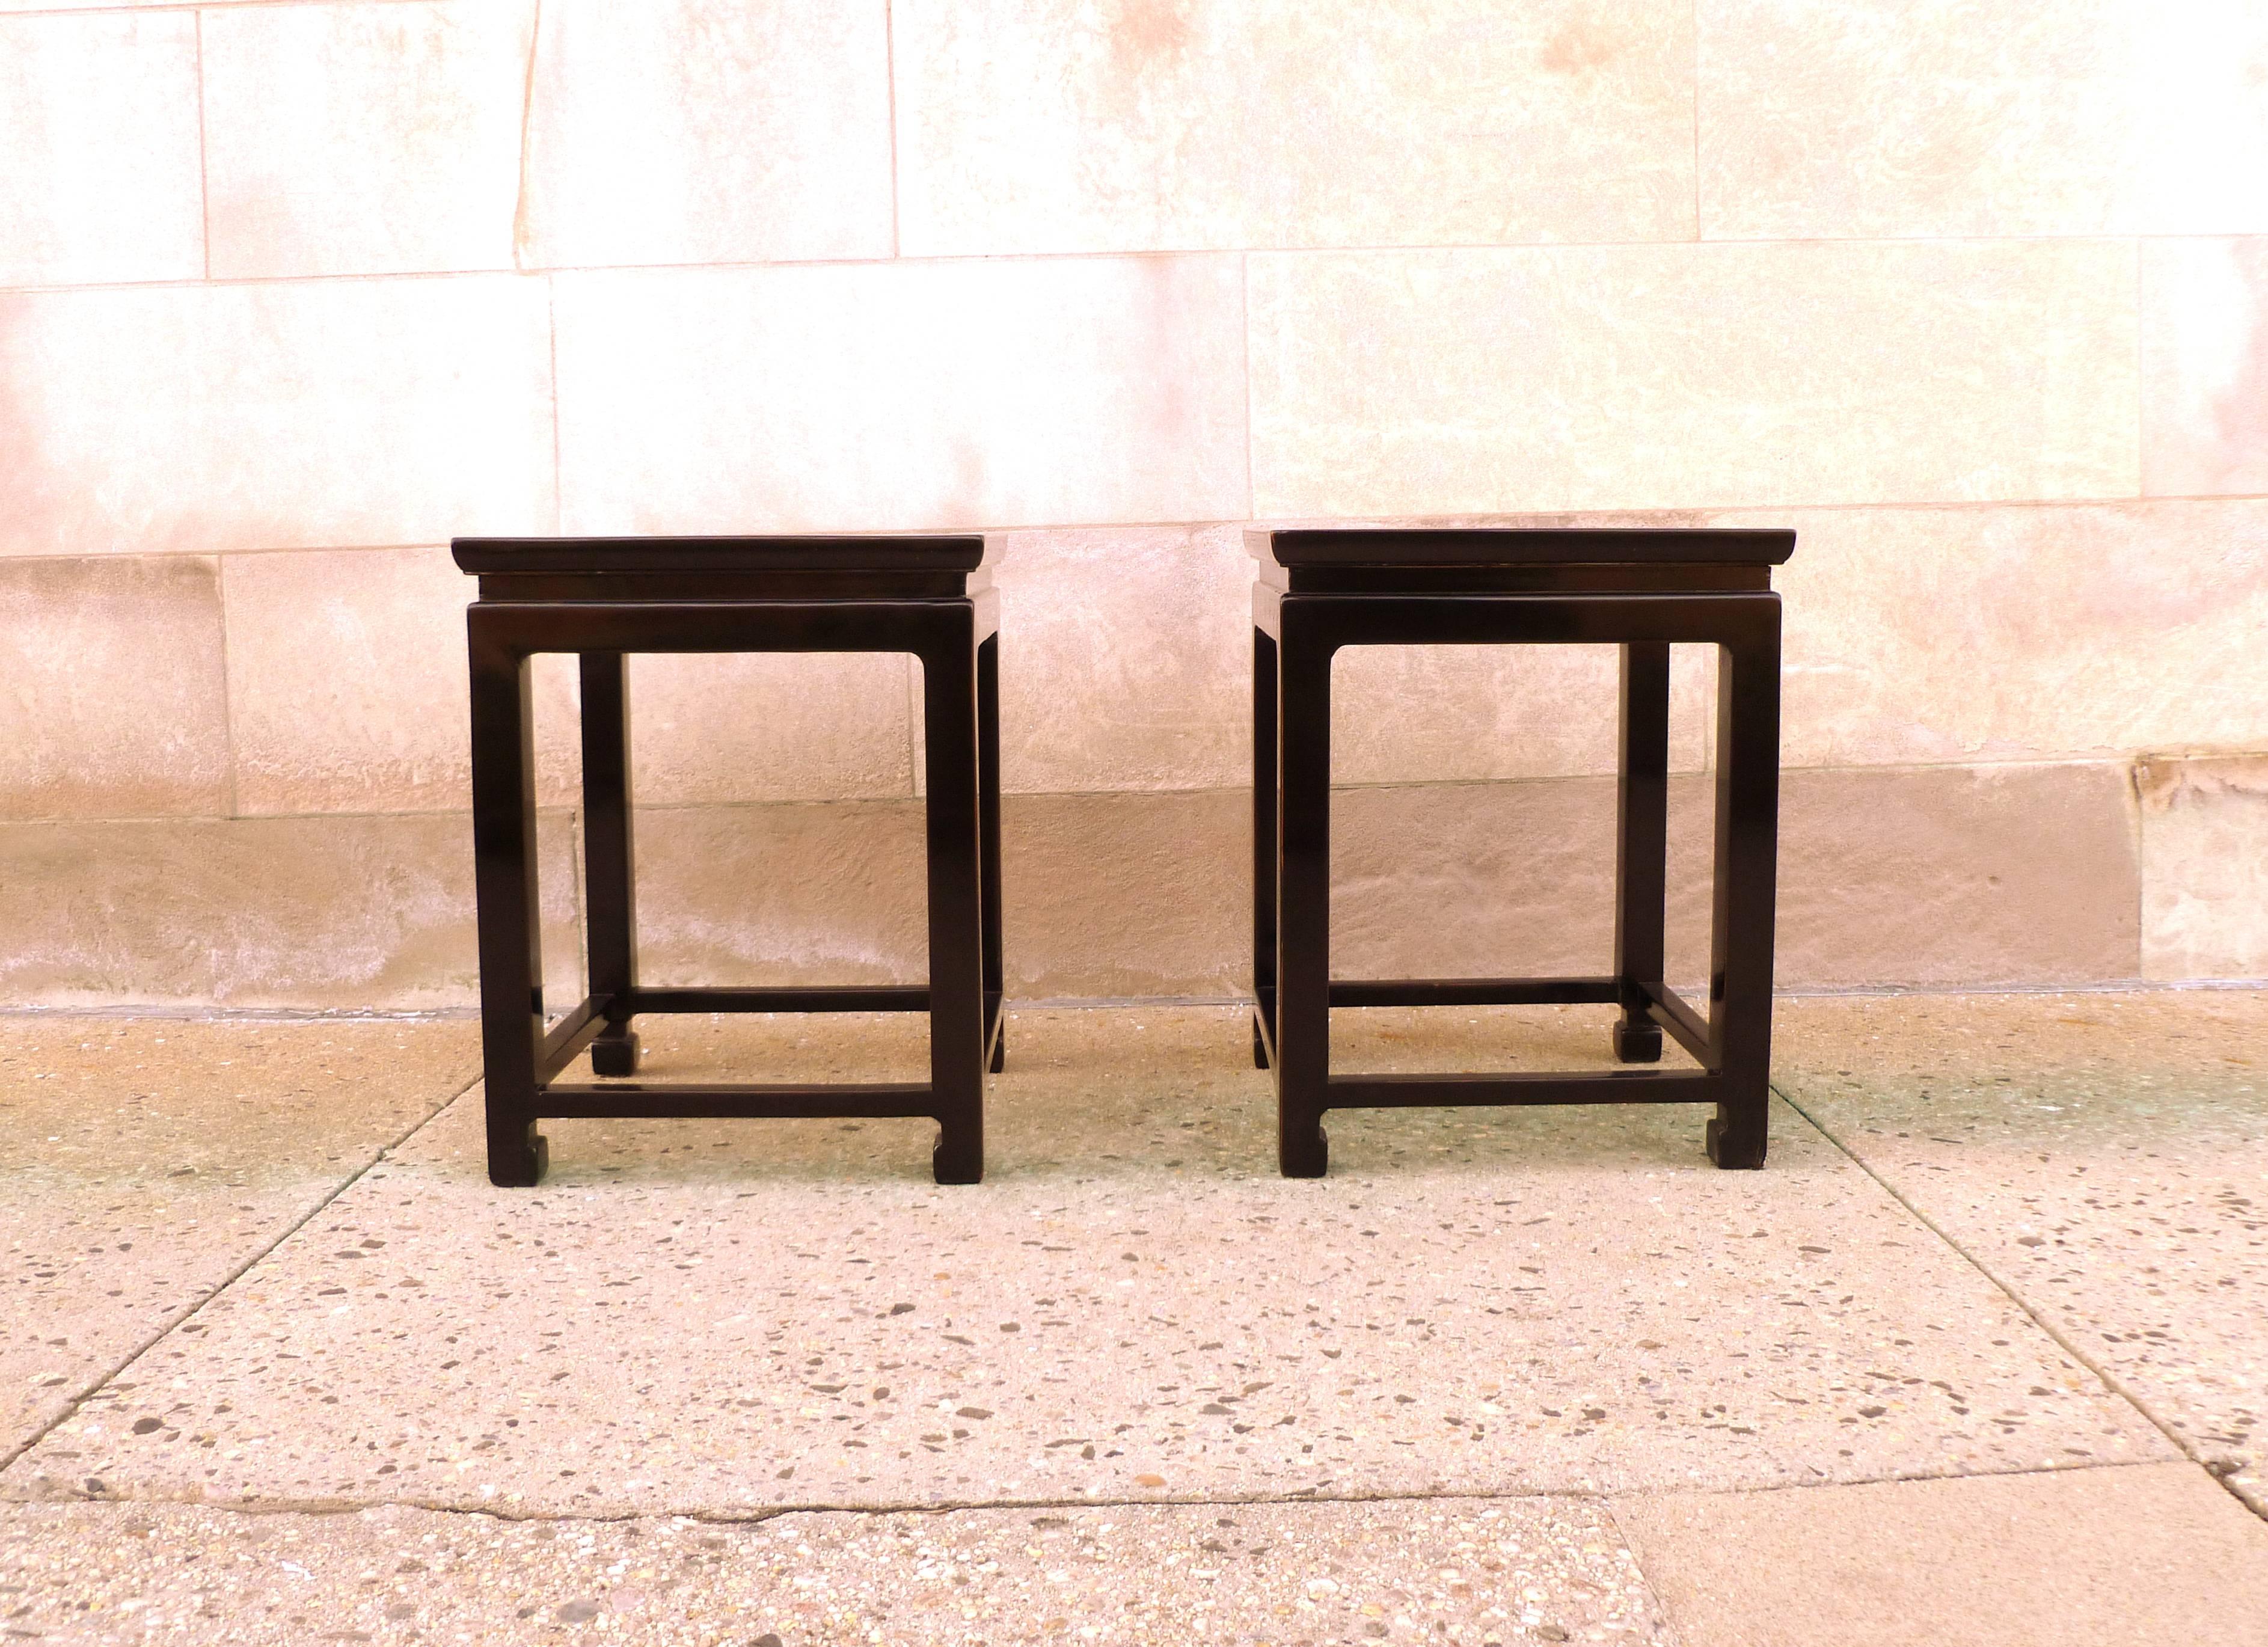 Fine black lacquer end tables. Simple and elegant form. Beautiful color and form.